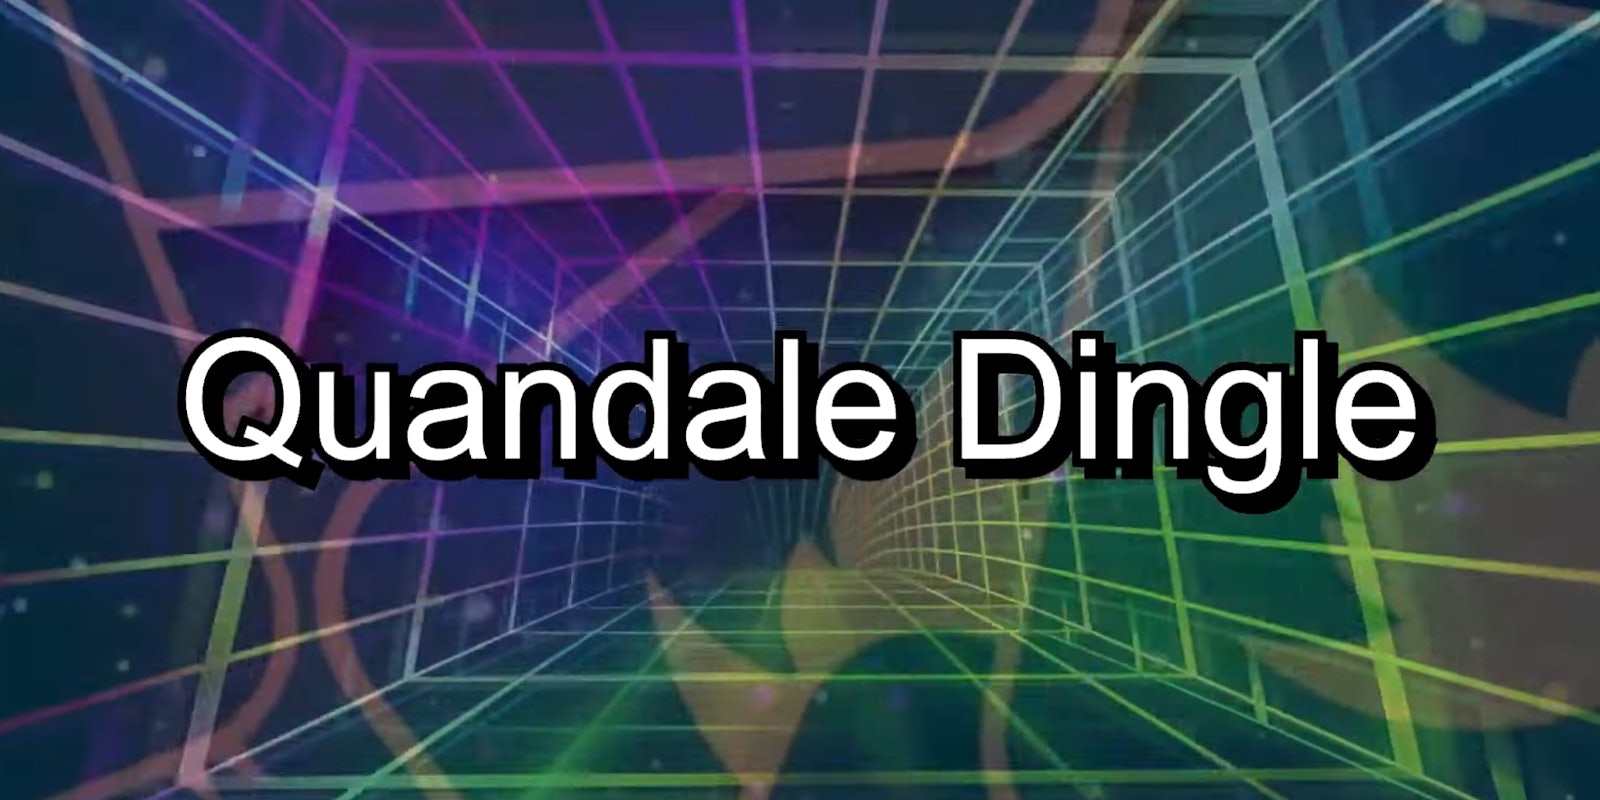 Quandale Dingle Meme: Everything You Need to Know